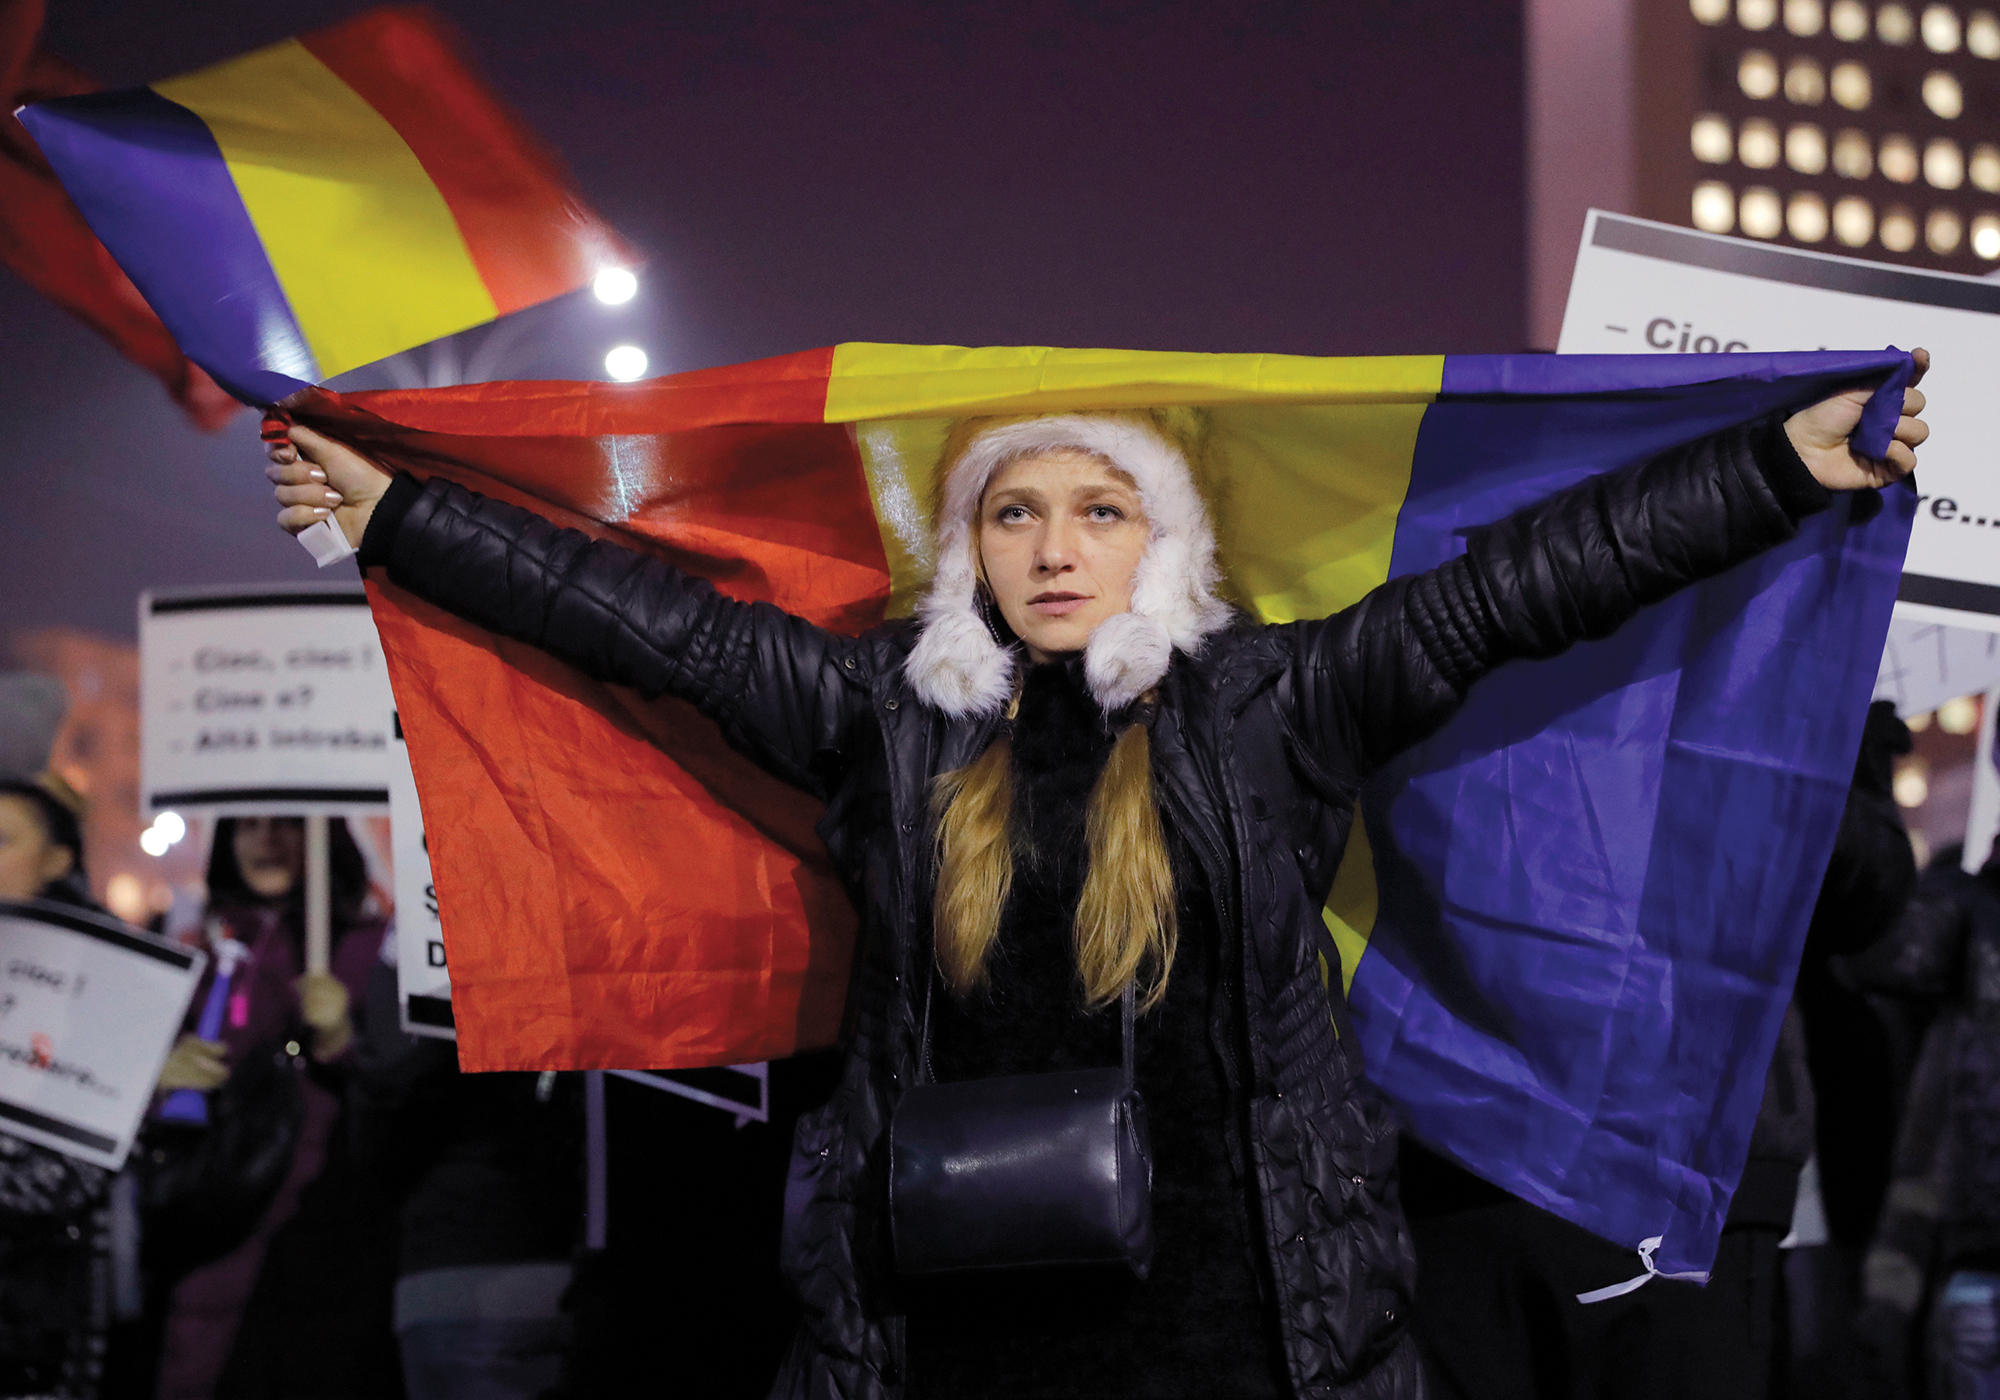 In February, 2017, twenty-eight years after Romanians toppled their dictatorship, protestors took to the streets again in the name of democracy, this time to fight a decree seen as soft on government corruption. AP Photo/Vadim Ghirda